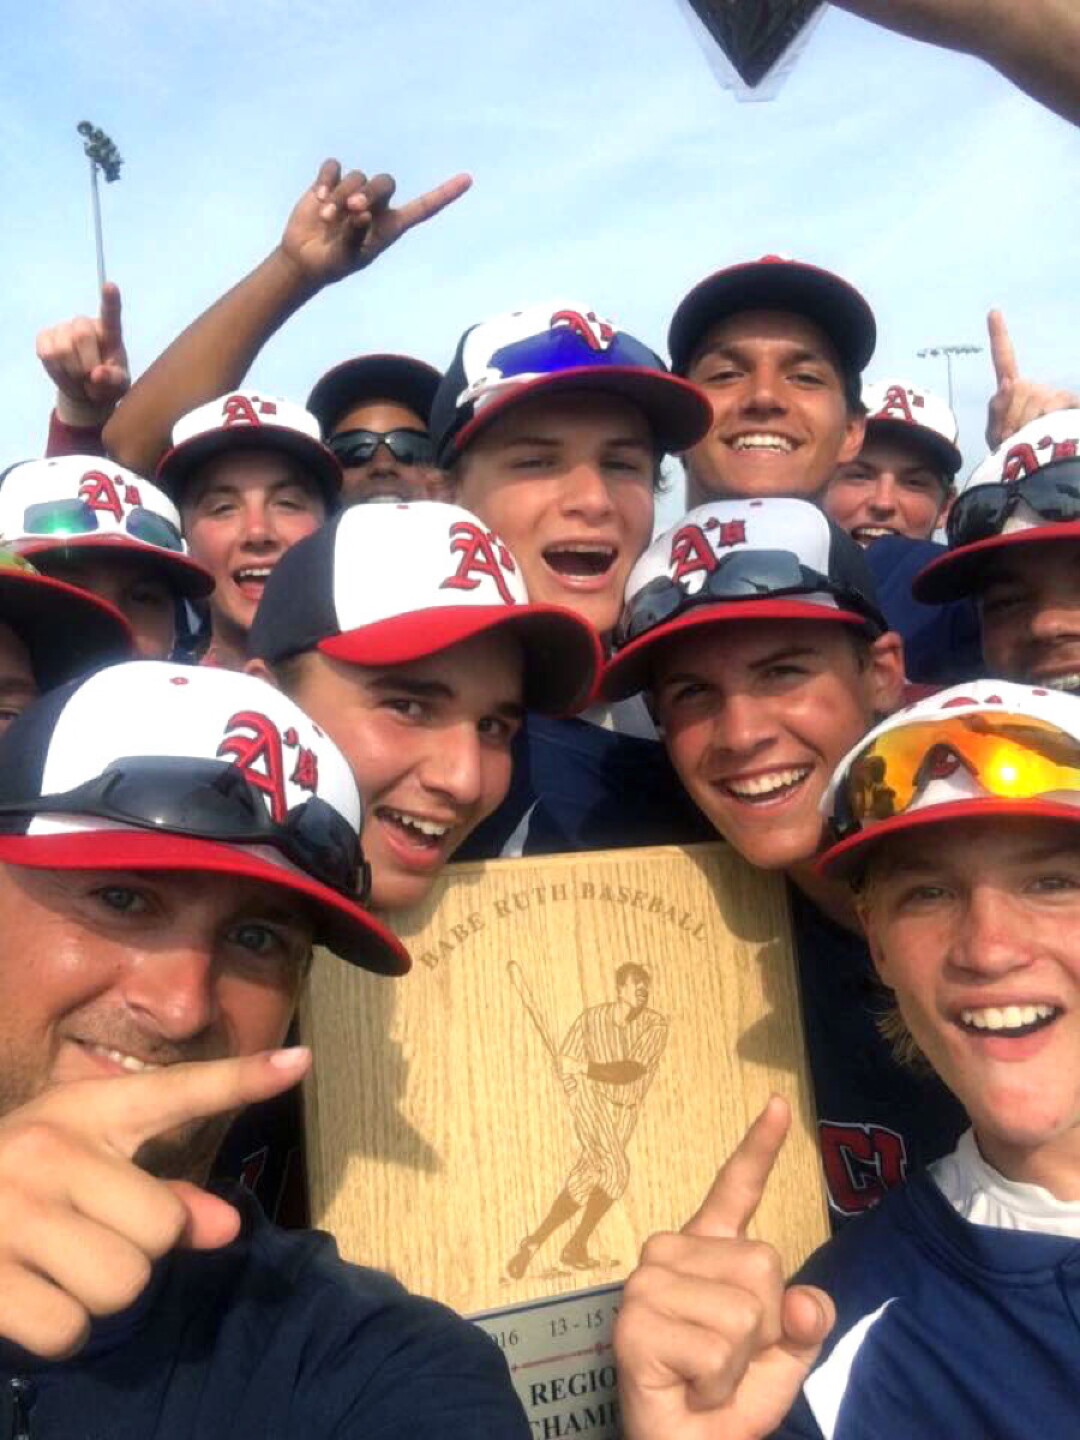 The Eau Claire Babe Ruth 15-and-under team celebrated its Regional title in July. The Eau Claire 13U team also won its regional tournament, and both teams are headed to their respective World Series.